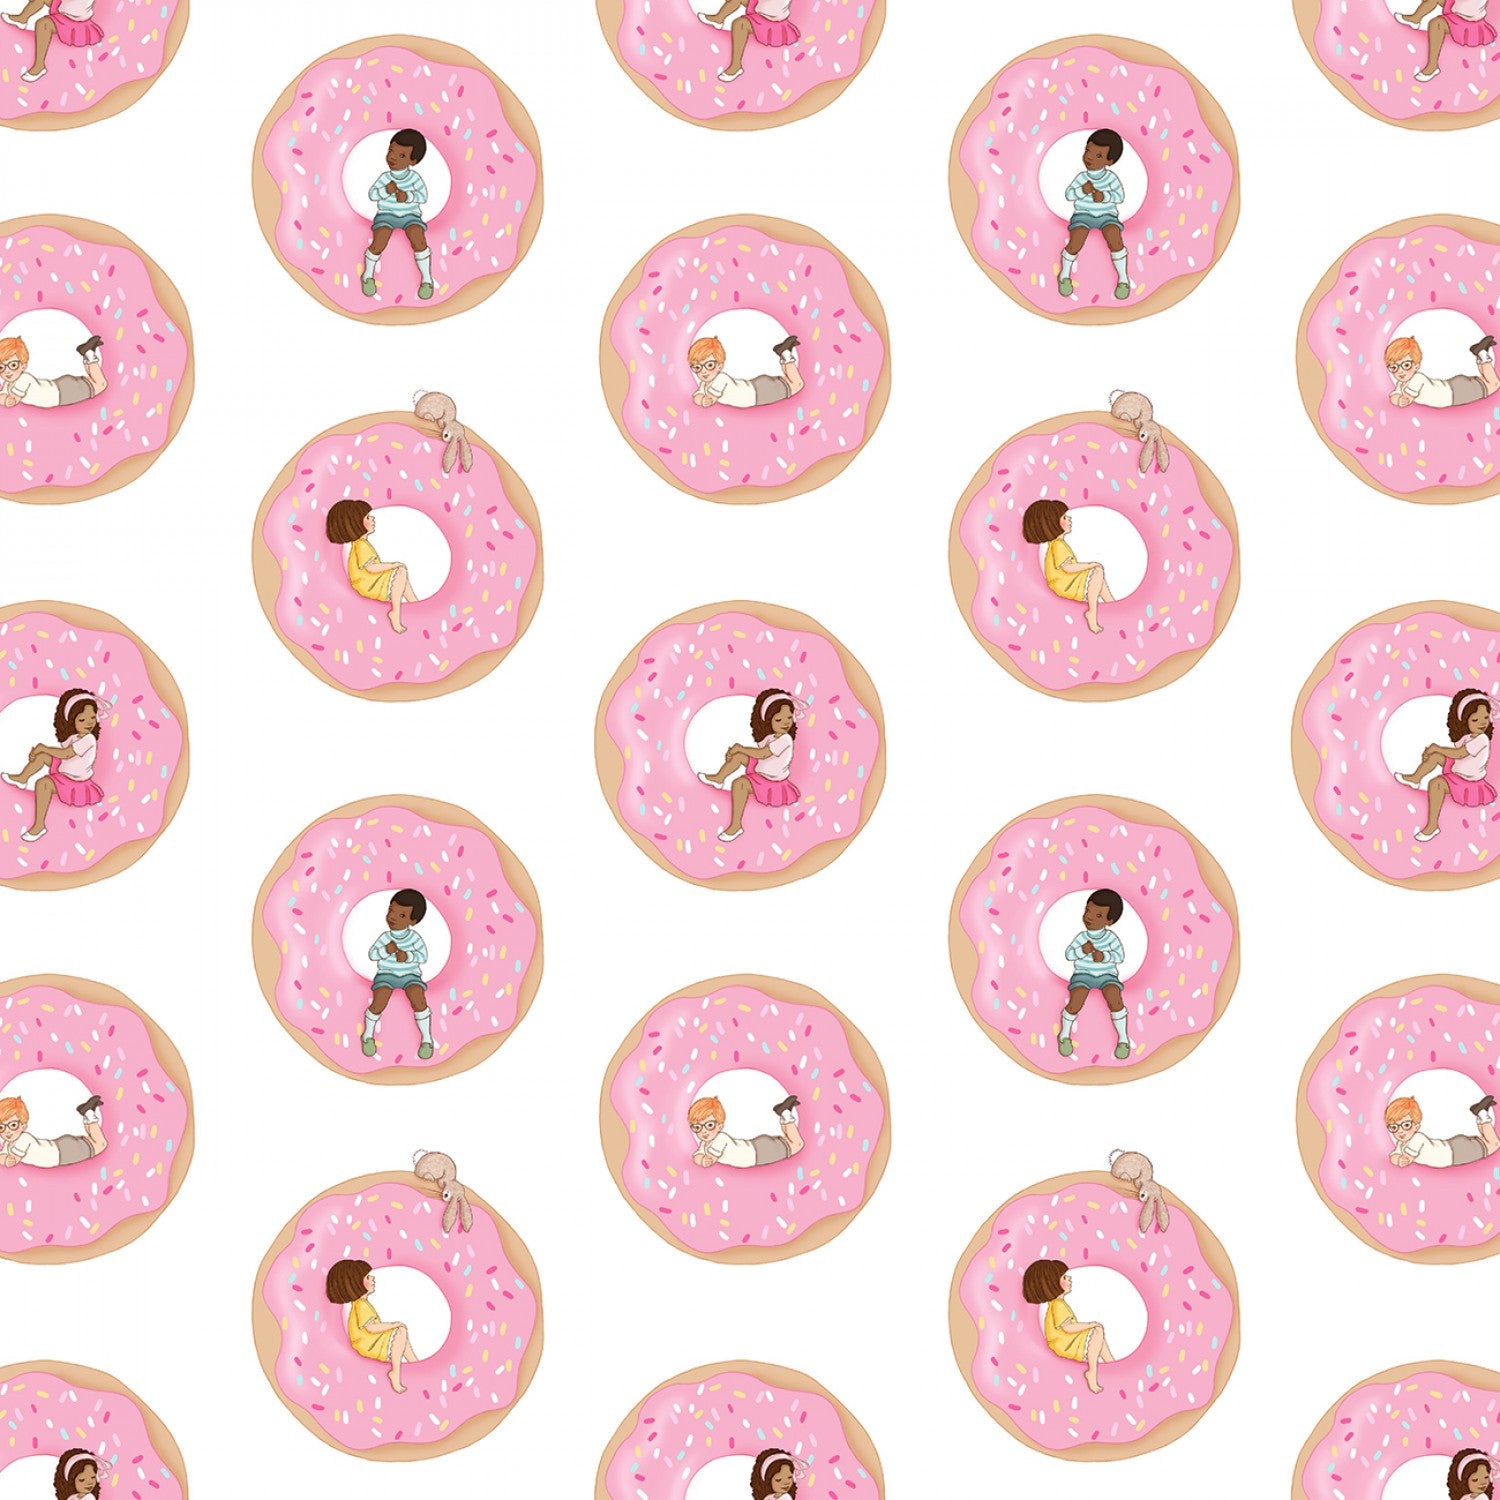 Yummy Scrummy Day - White Donuts by Belle & Boo for Michael Miller